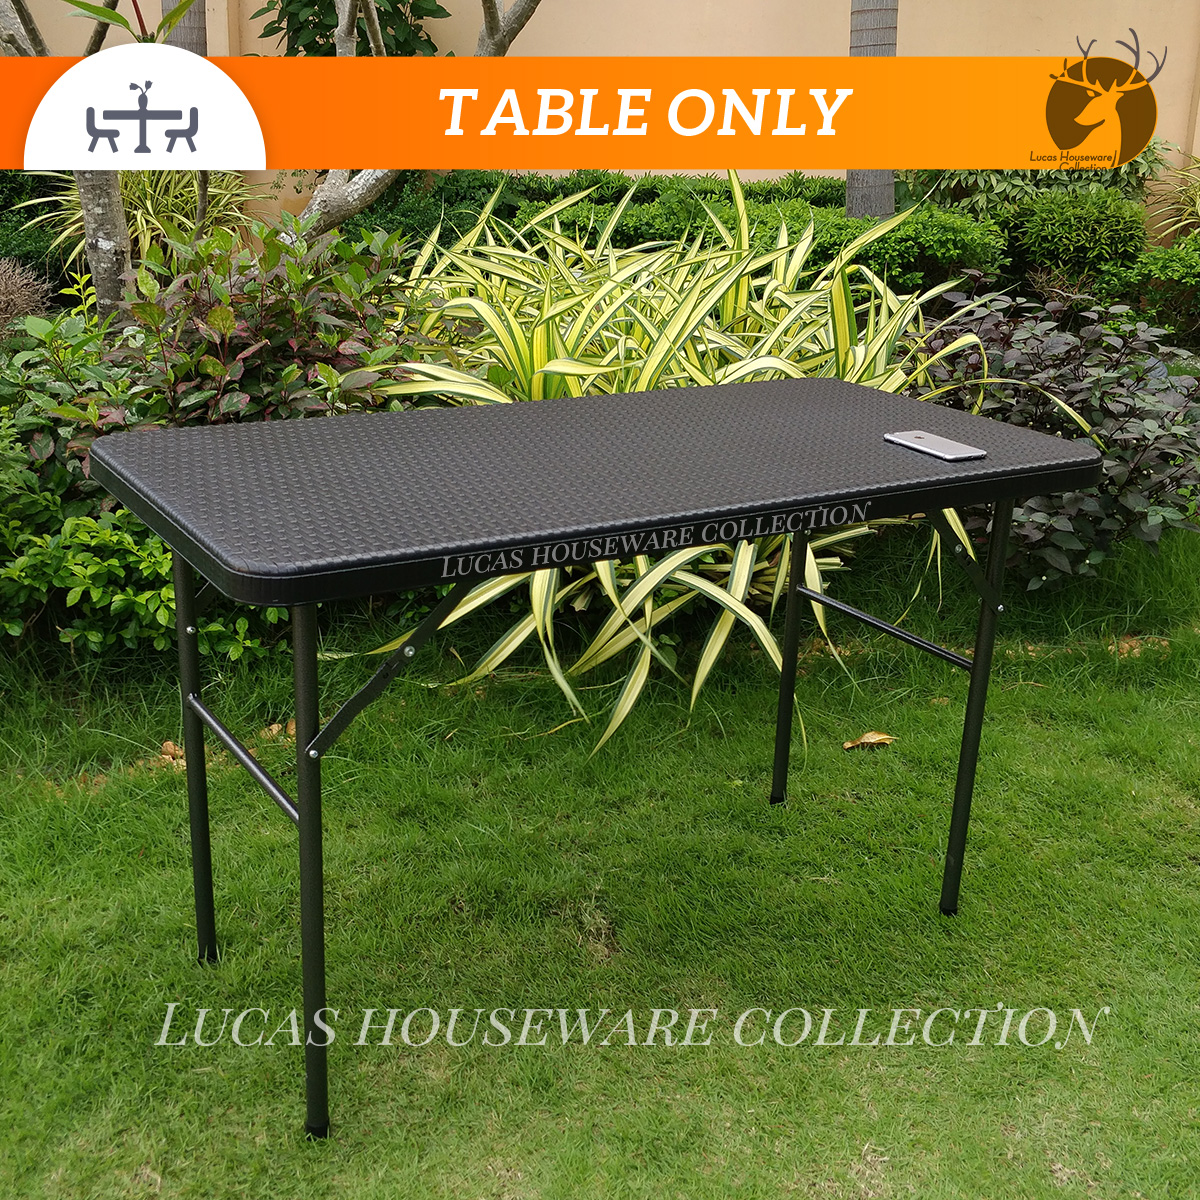 Decor & Style DSTB5-352 4ft. Fold-in-Half Table, Gardening Furniture, Lawn and Garden, Abenson Hardware